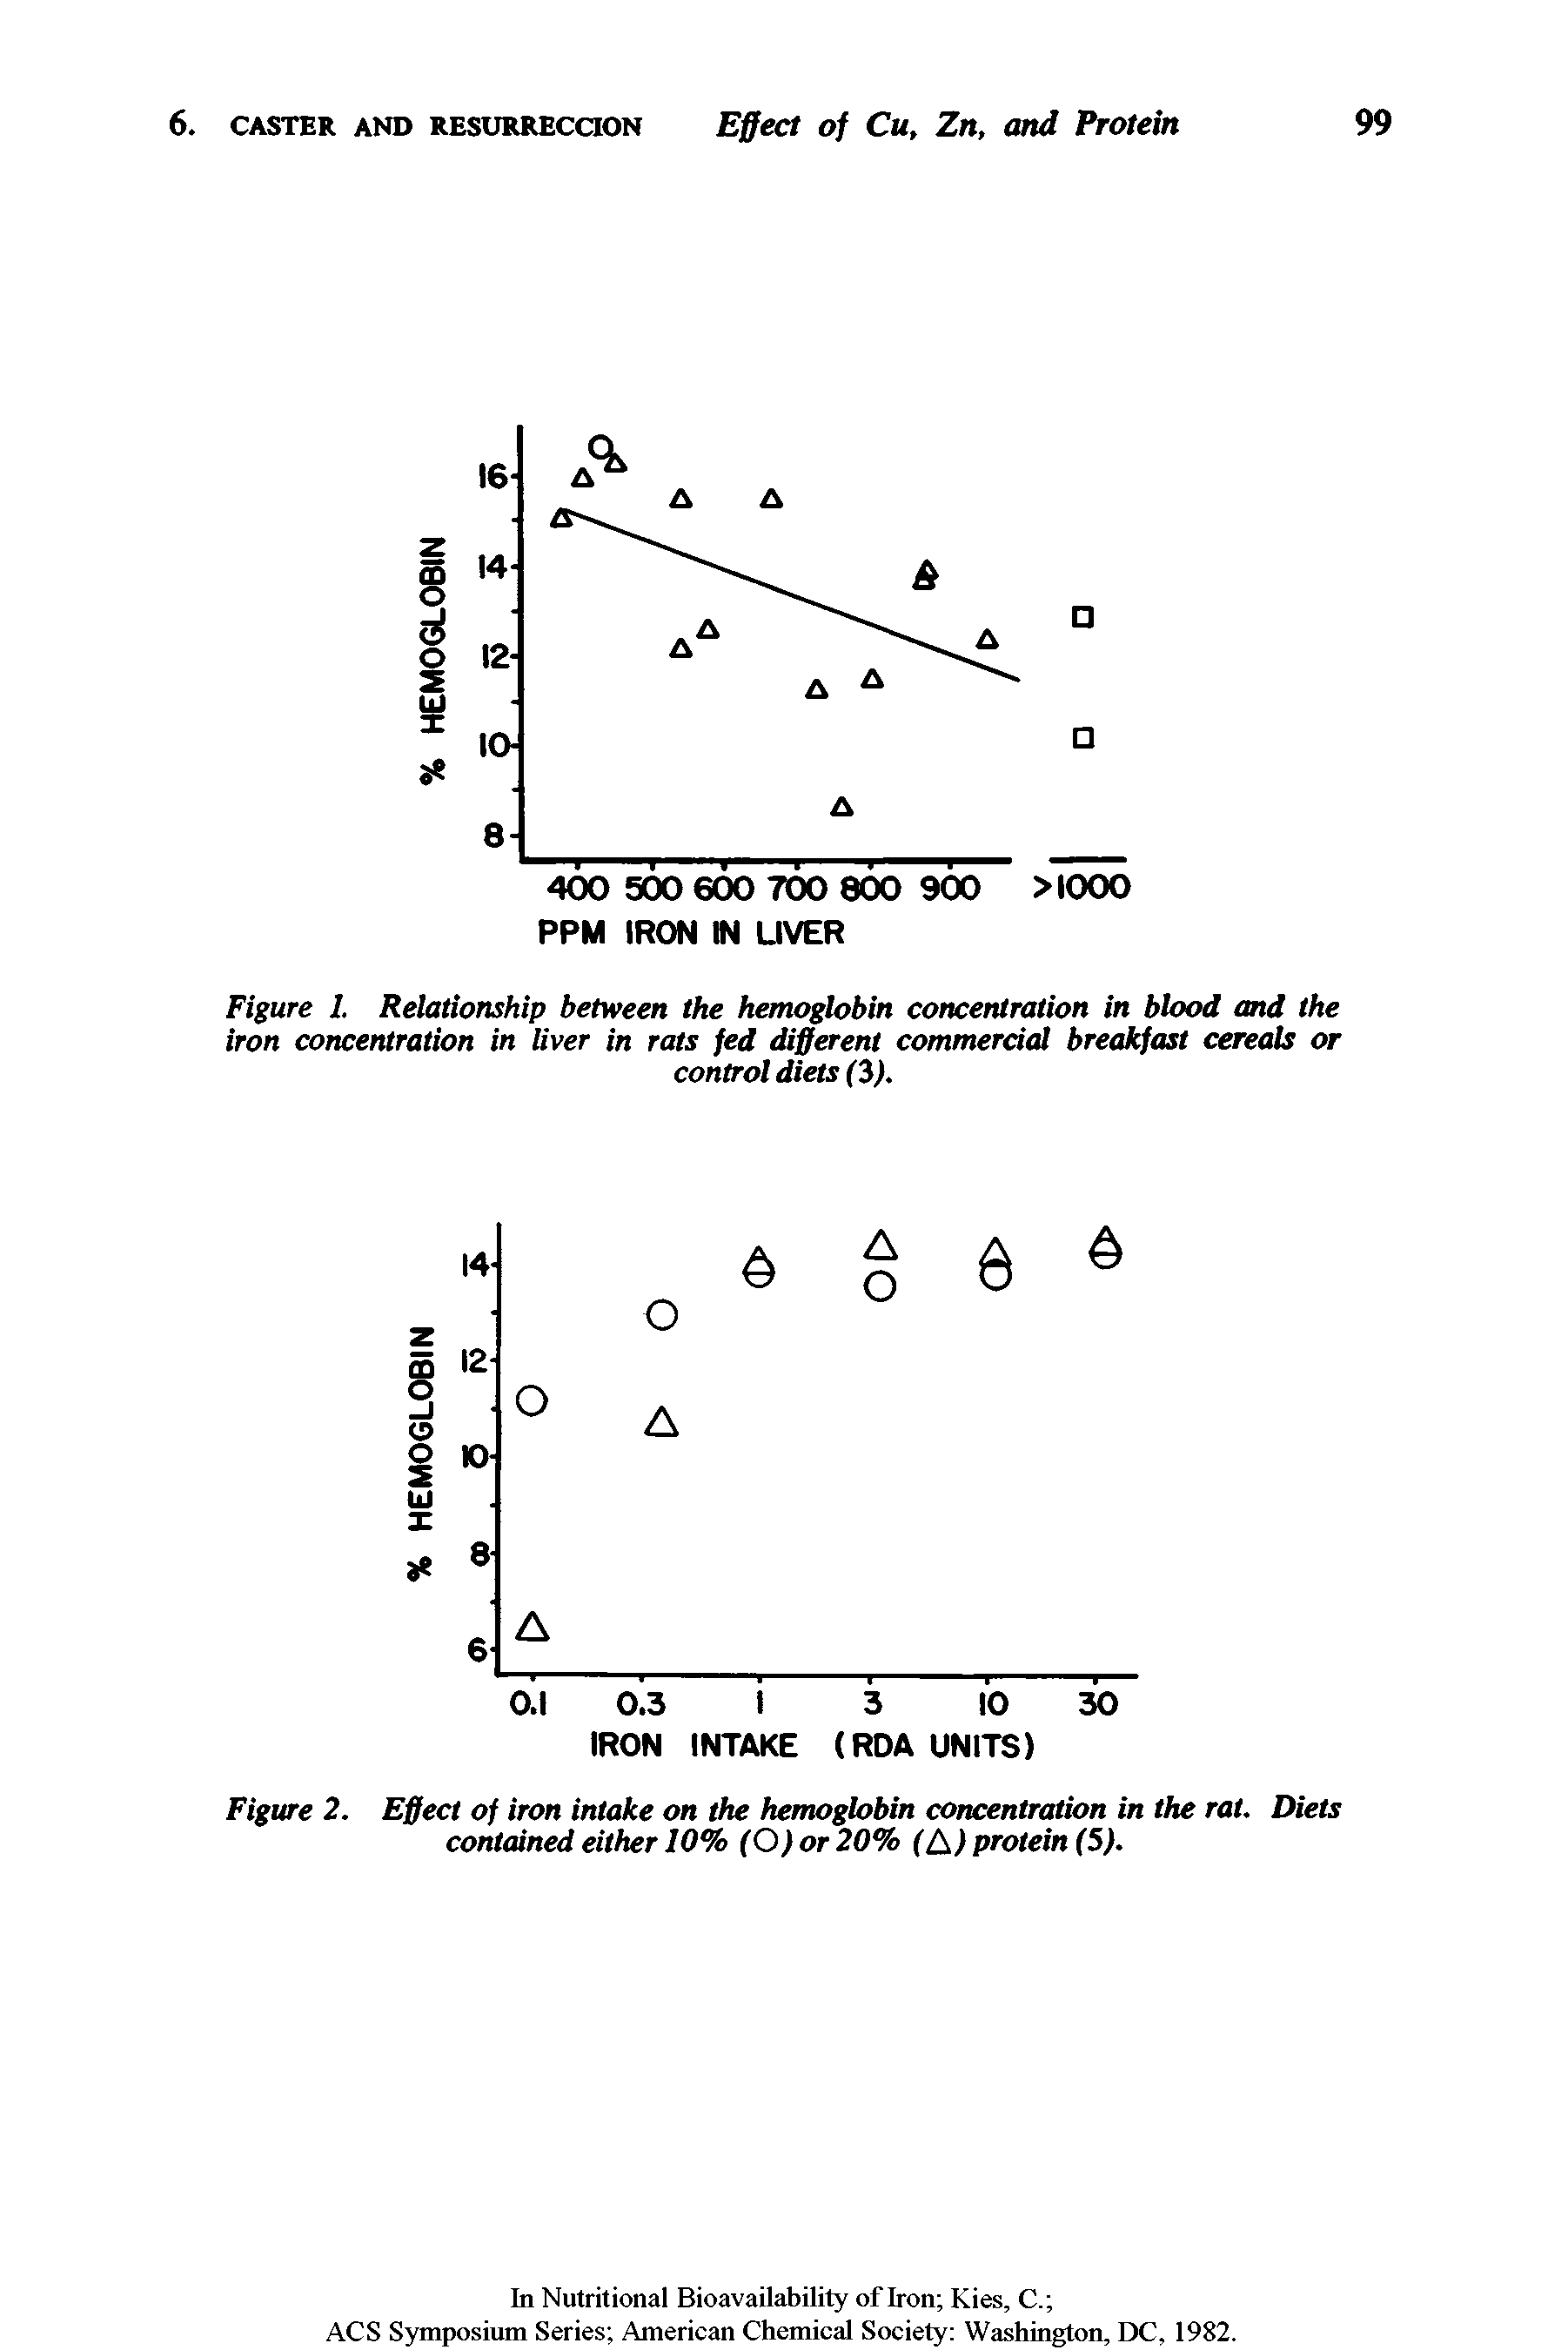 Figure 2. Effect of iron intake on the hemoglobin concentration in the rat. Diets contained either 10% (O)or 20% (A) protein (5).